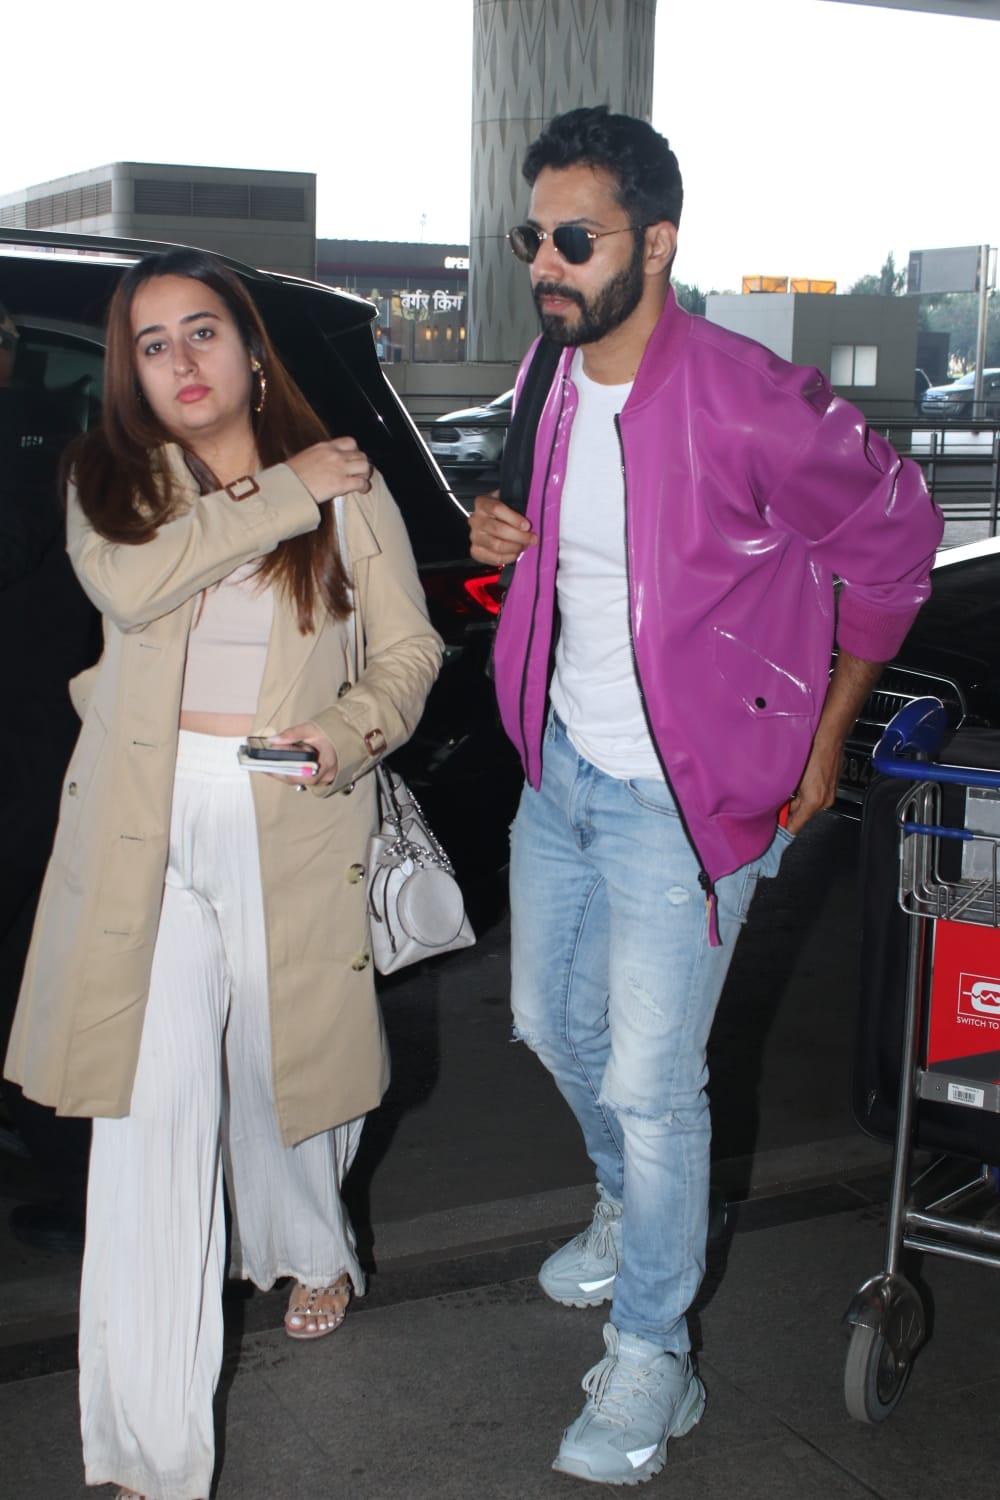 Varun Dhawan and Natasha Dalal were clicked at the airport as they jetted off